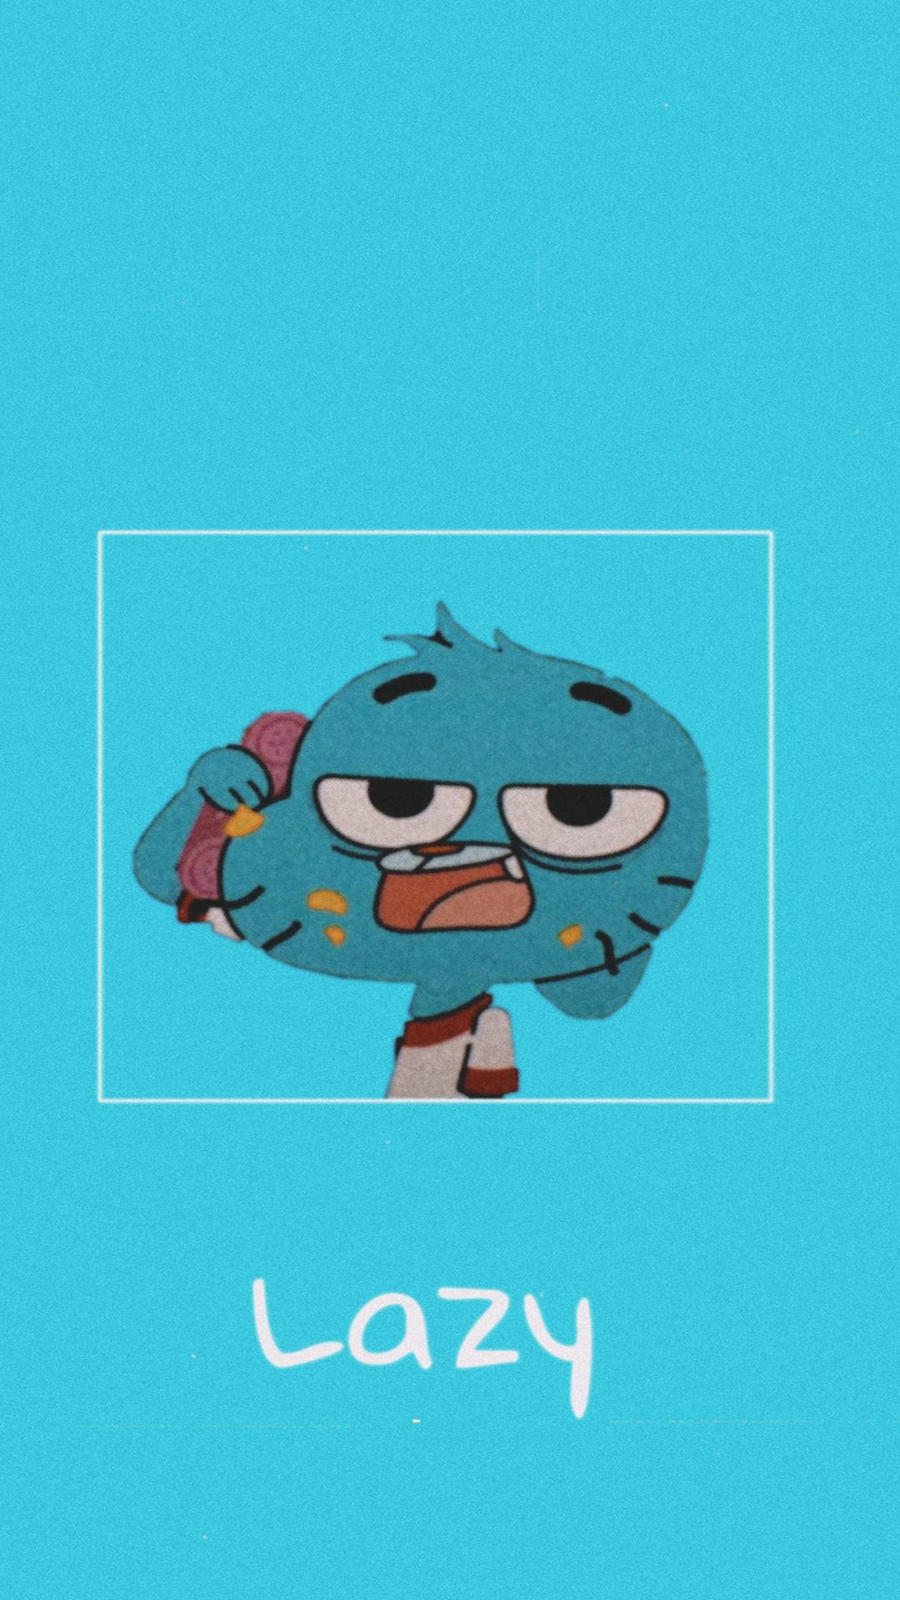 gumball wallpaper 4K Apk Download for Android Latest version 15  comrrawaniagumballHD